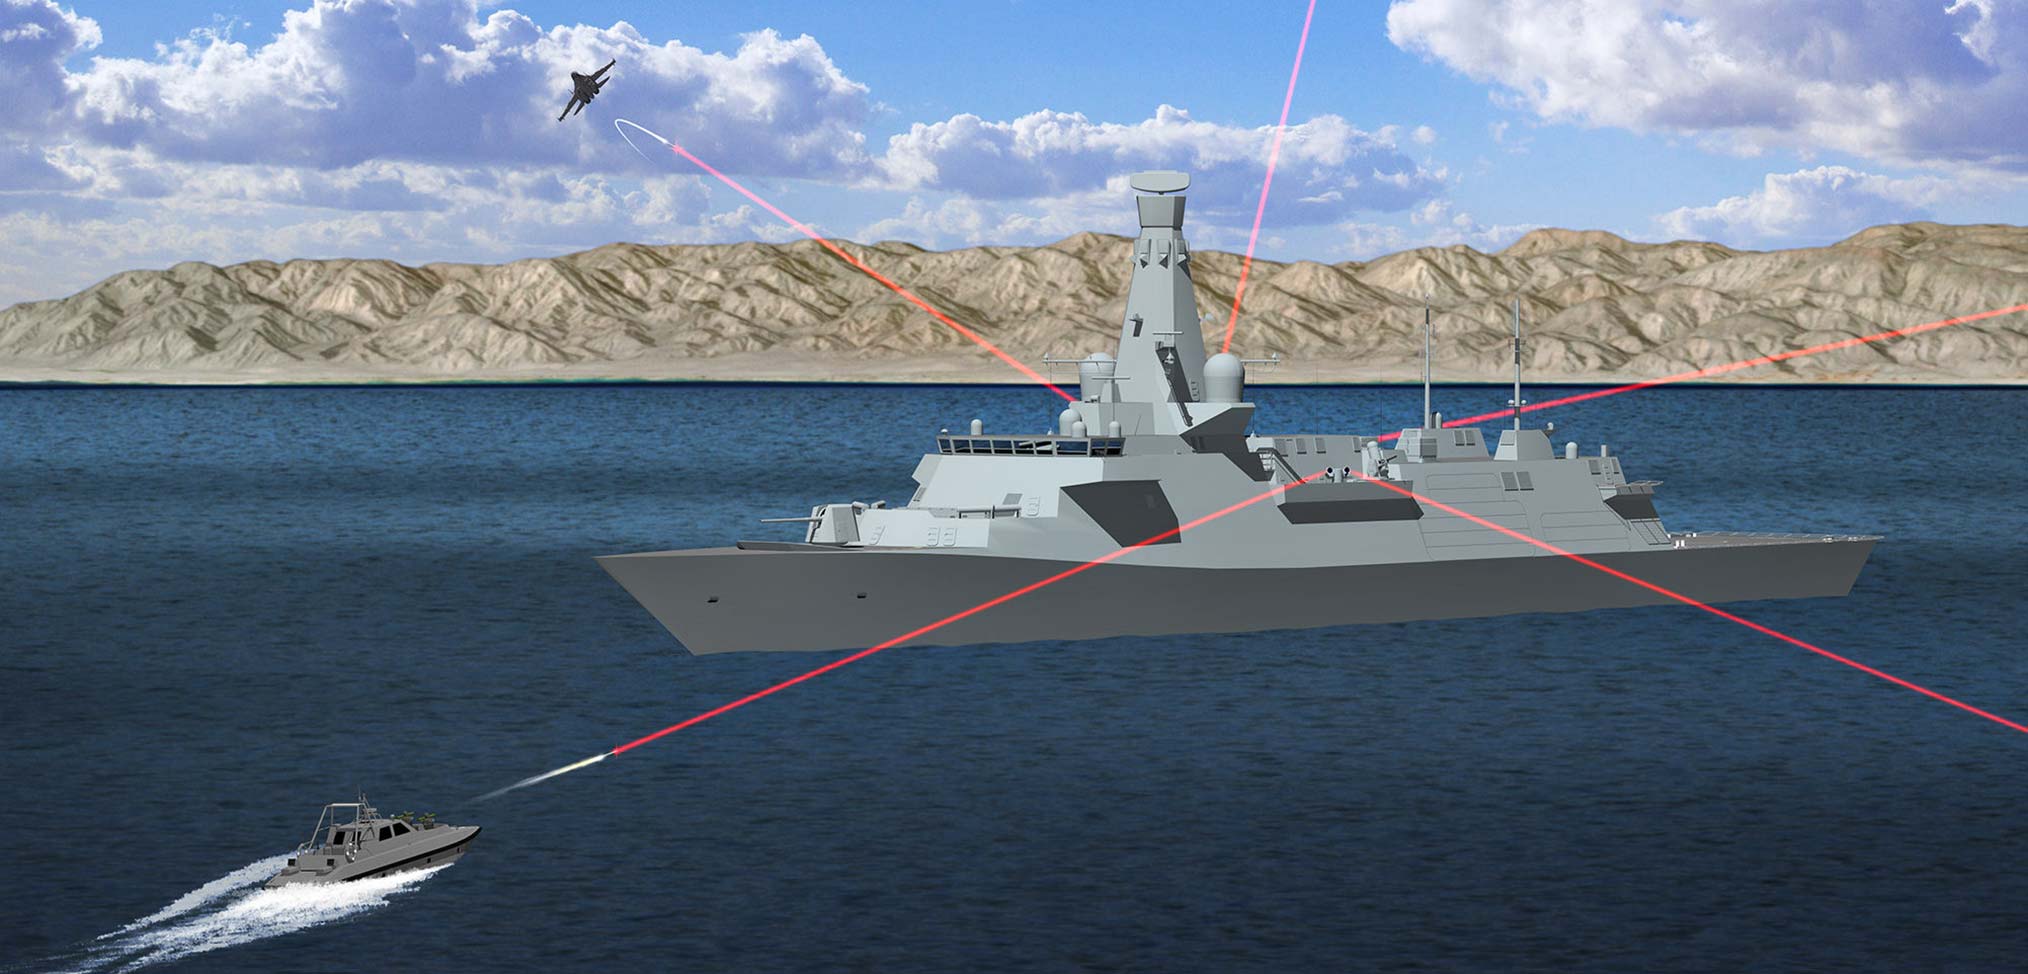 Solving the Royal Navy’s lethality problems